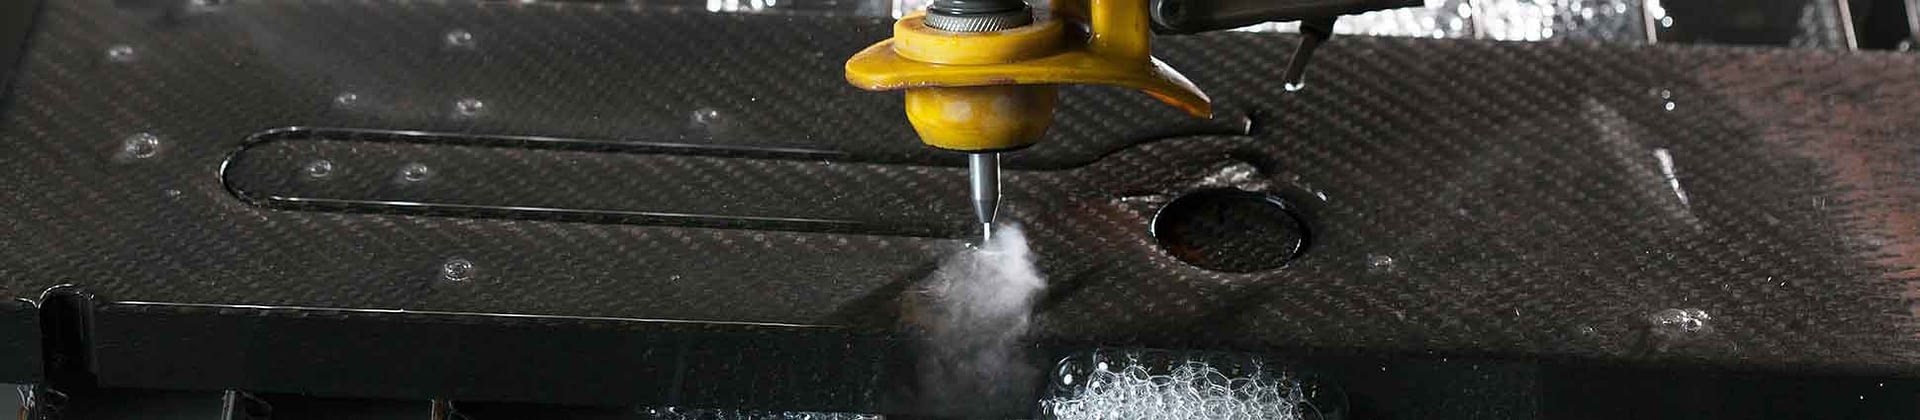 Water jet composite cutting